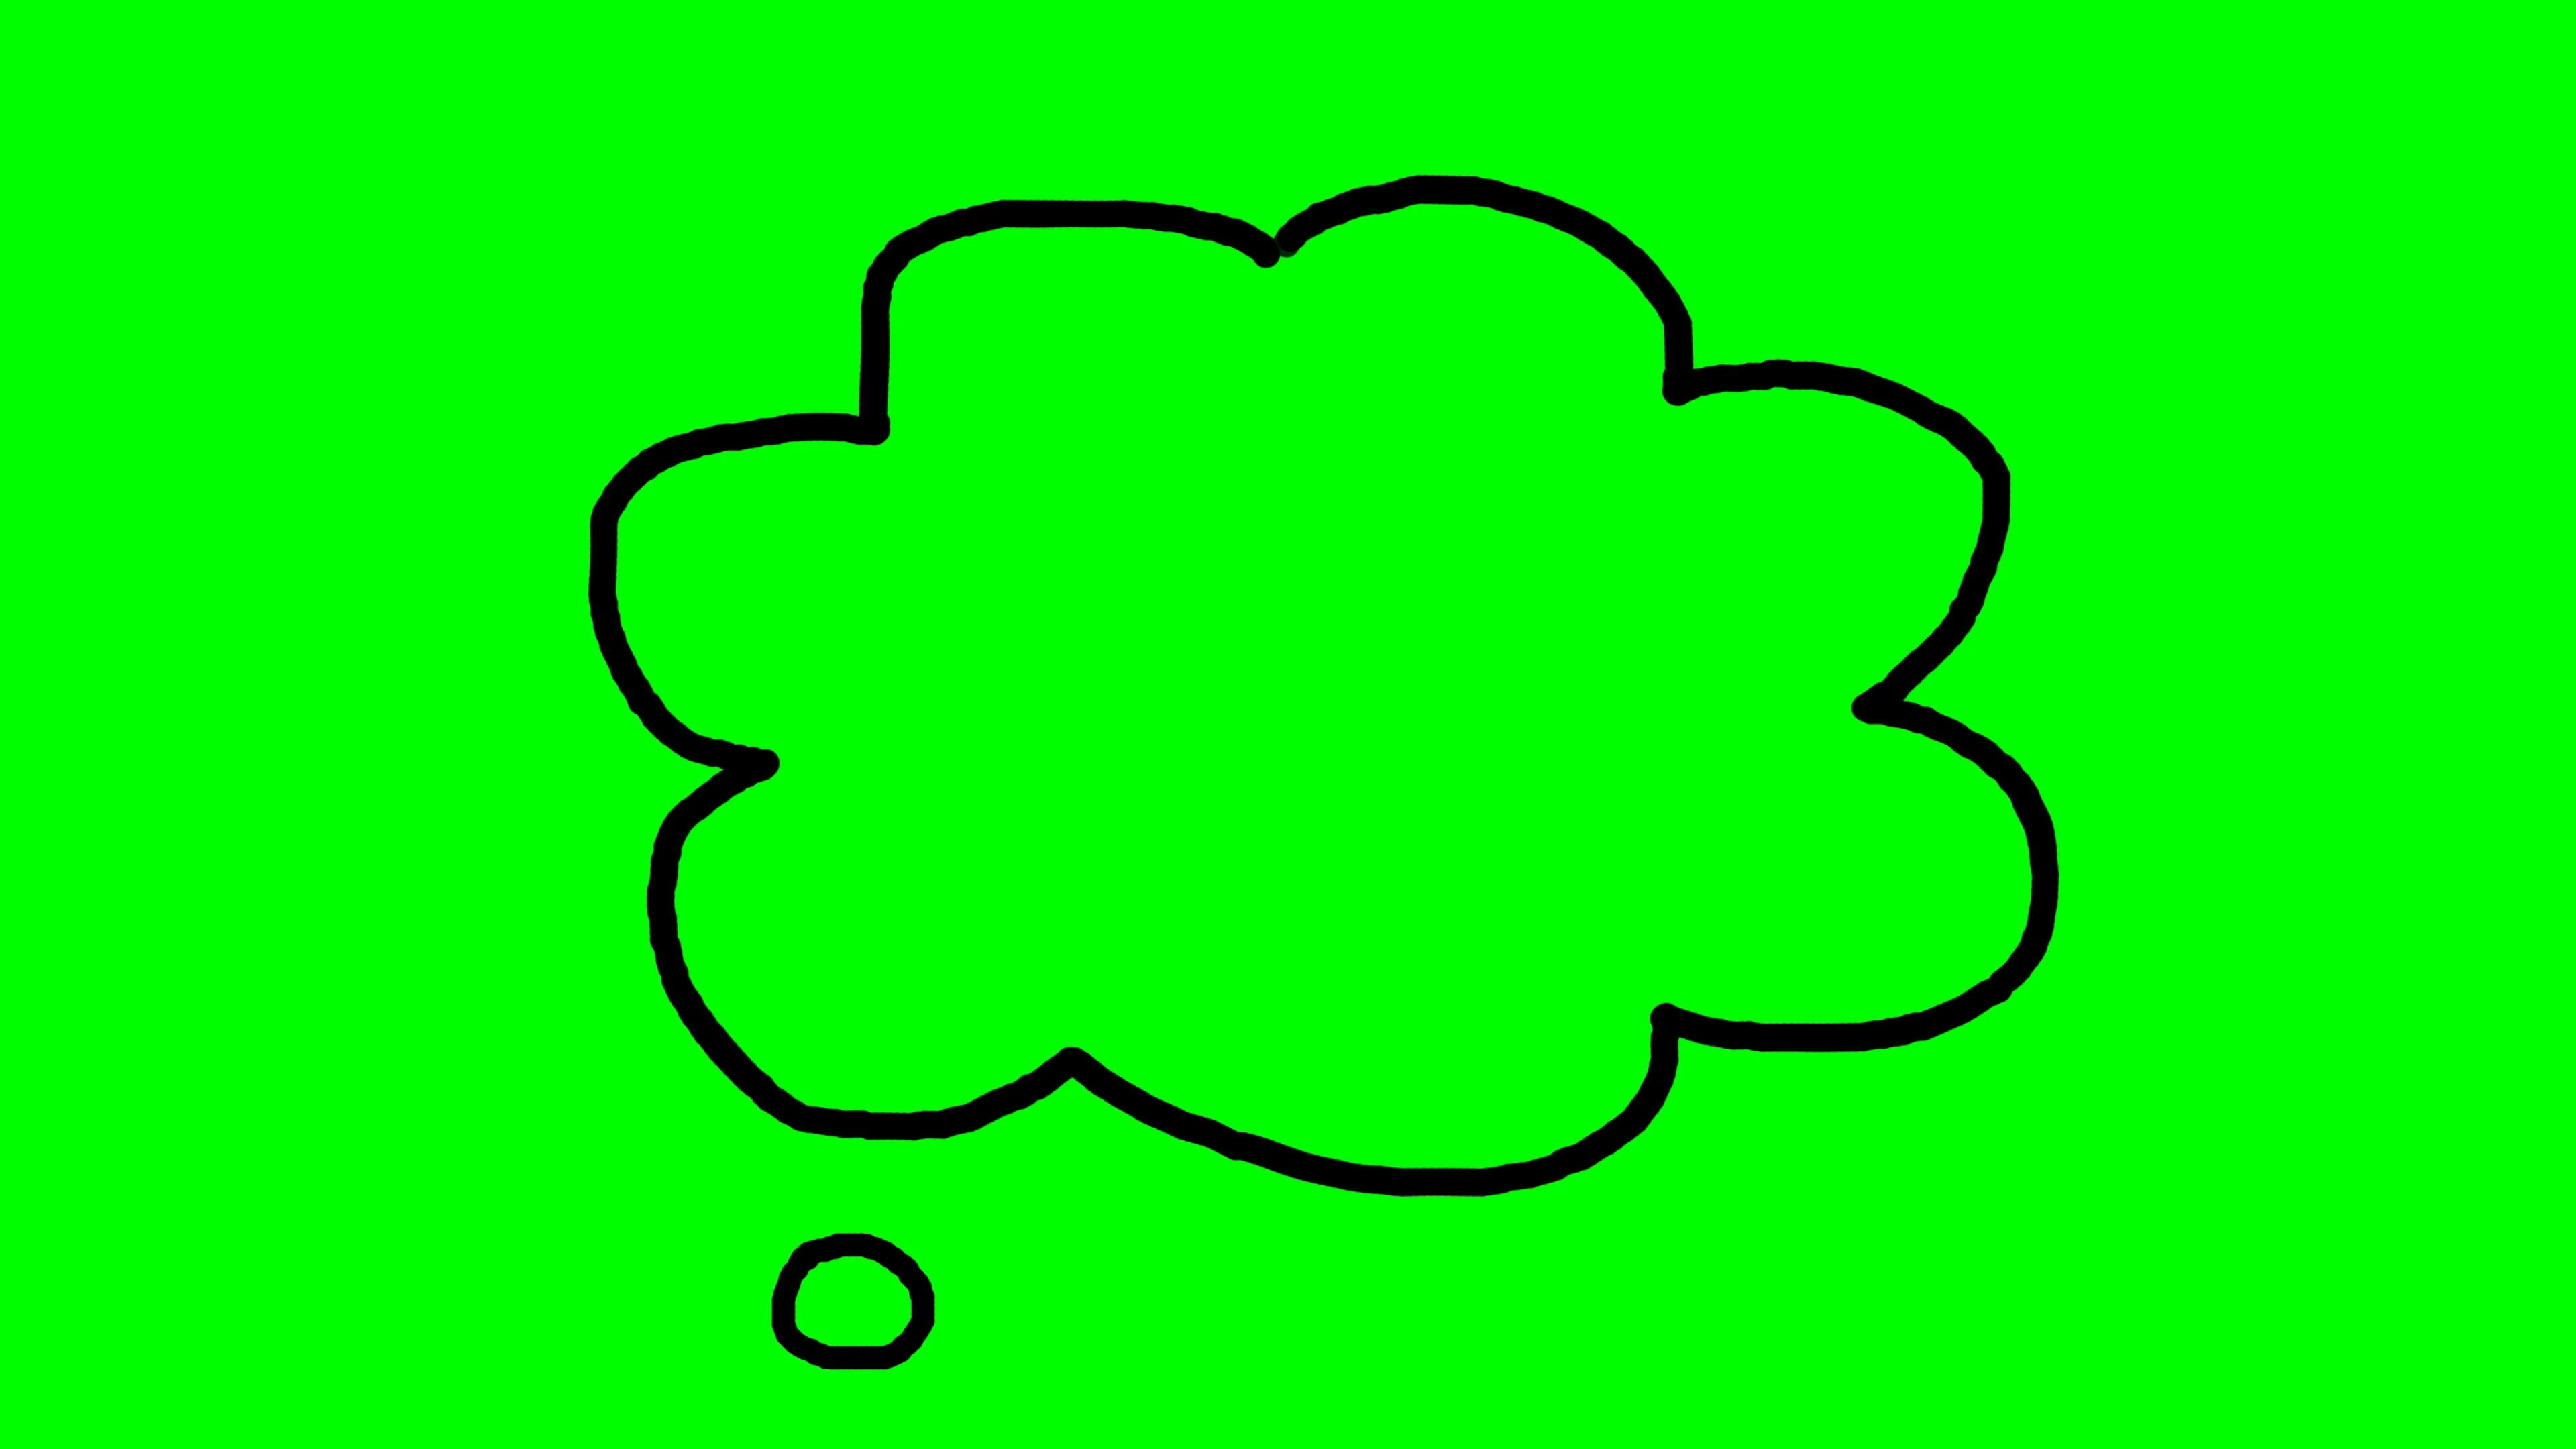 green thought bubble